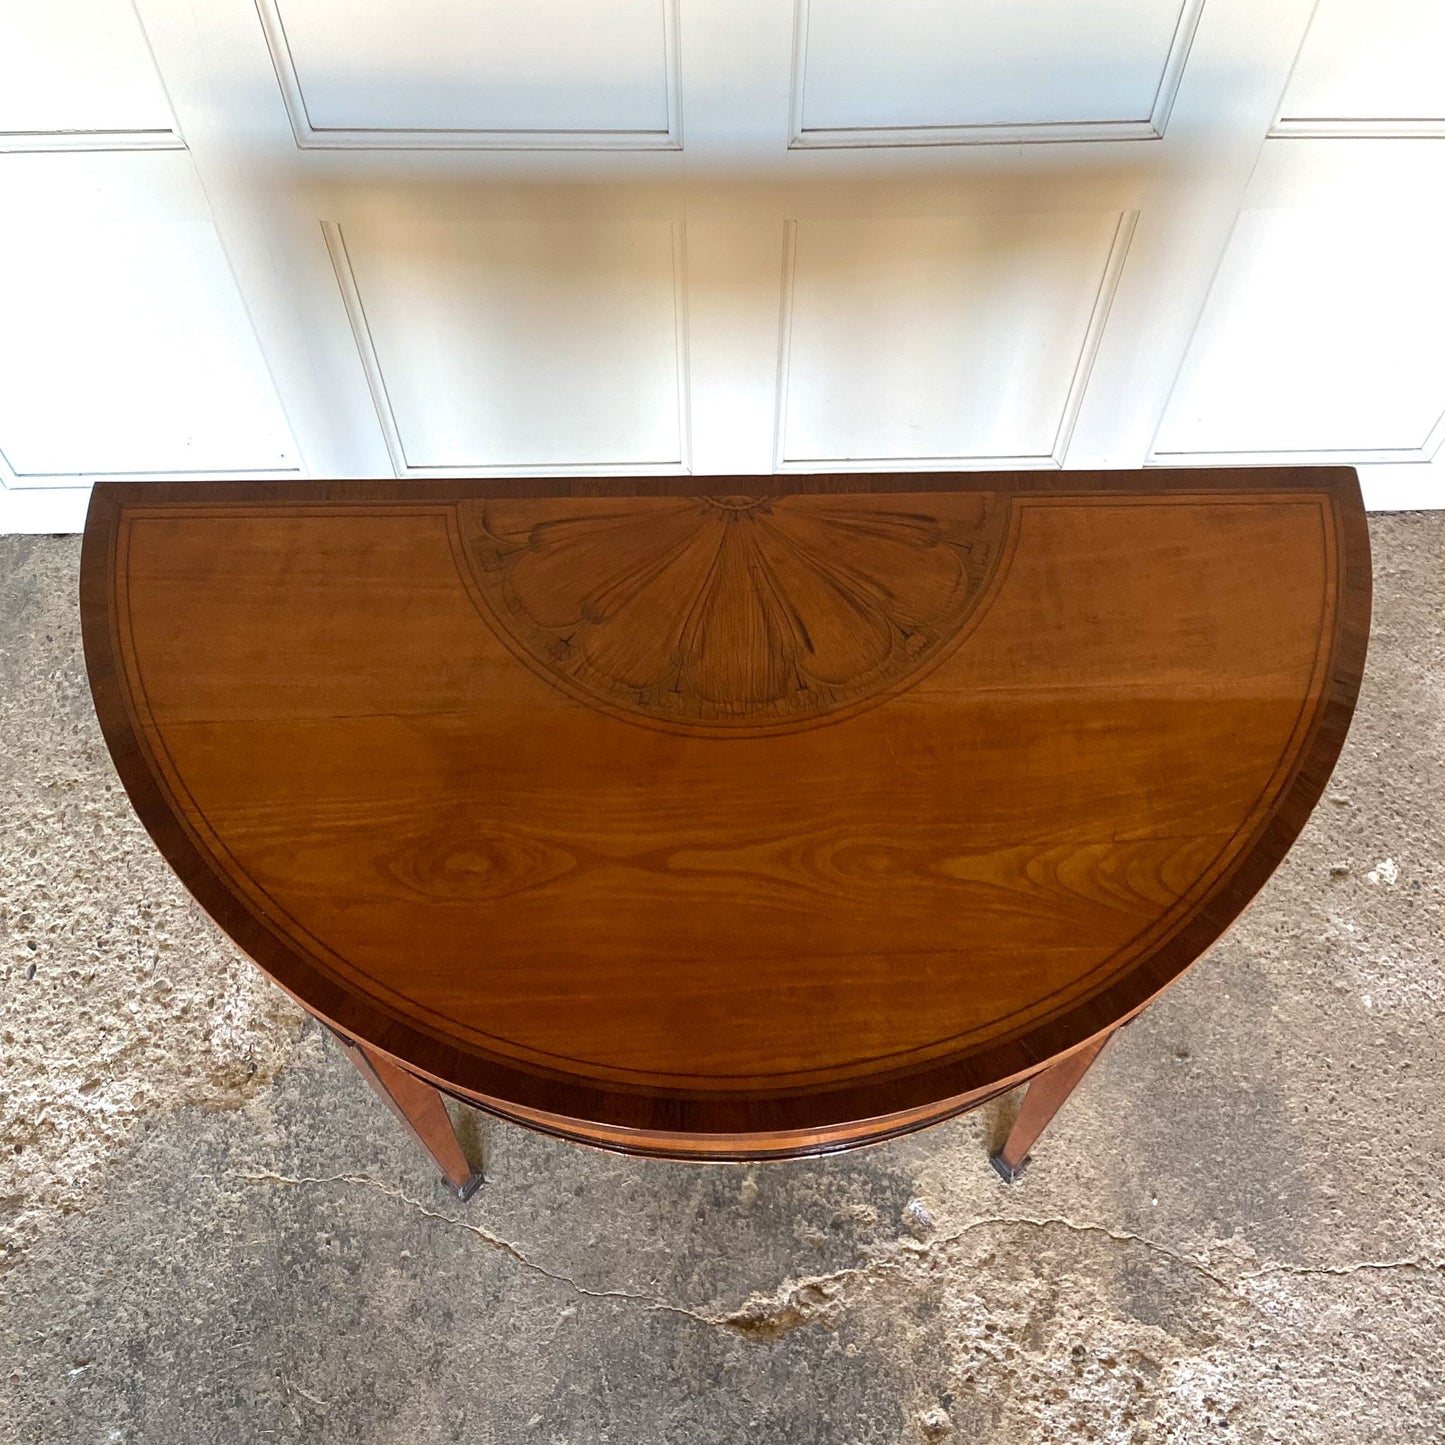 George III satinwood and marquetry demilune card table